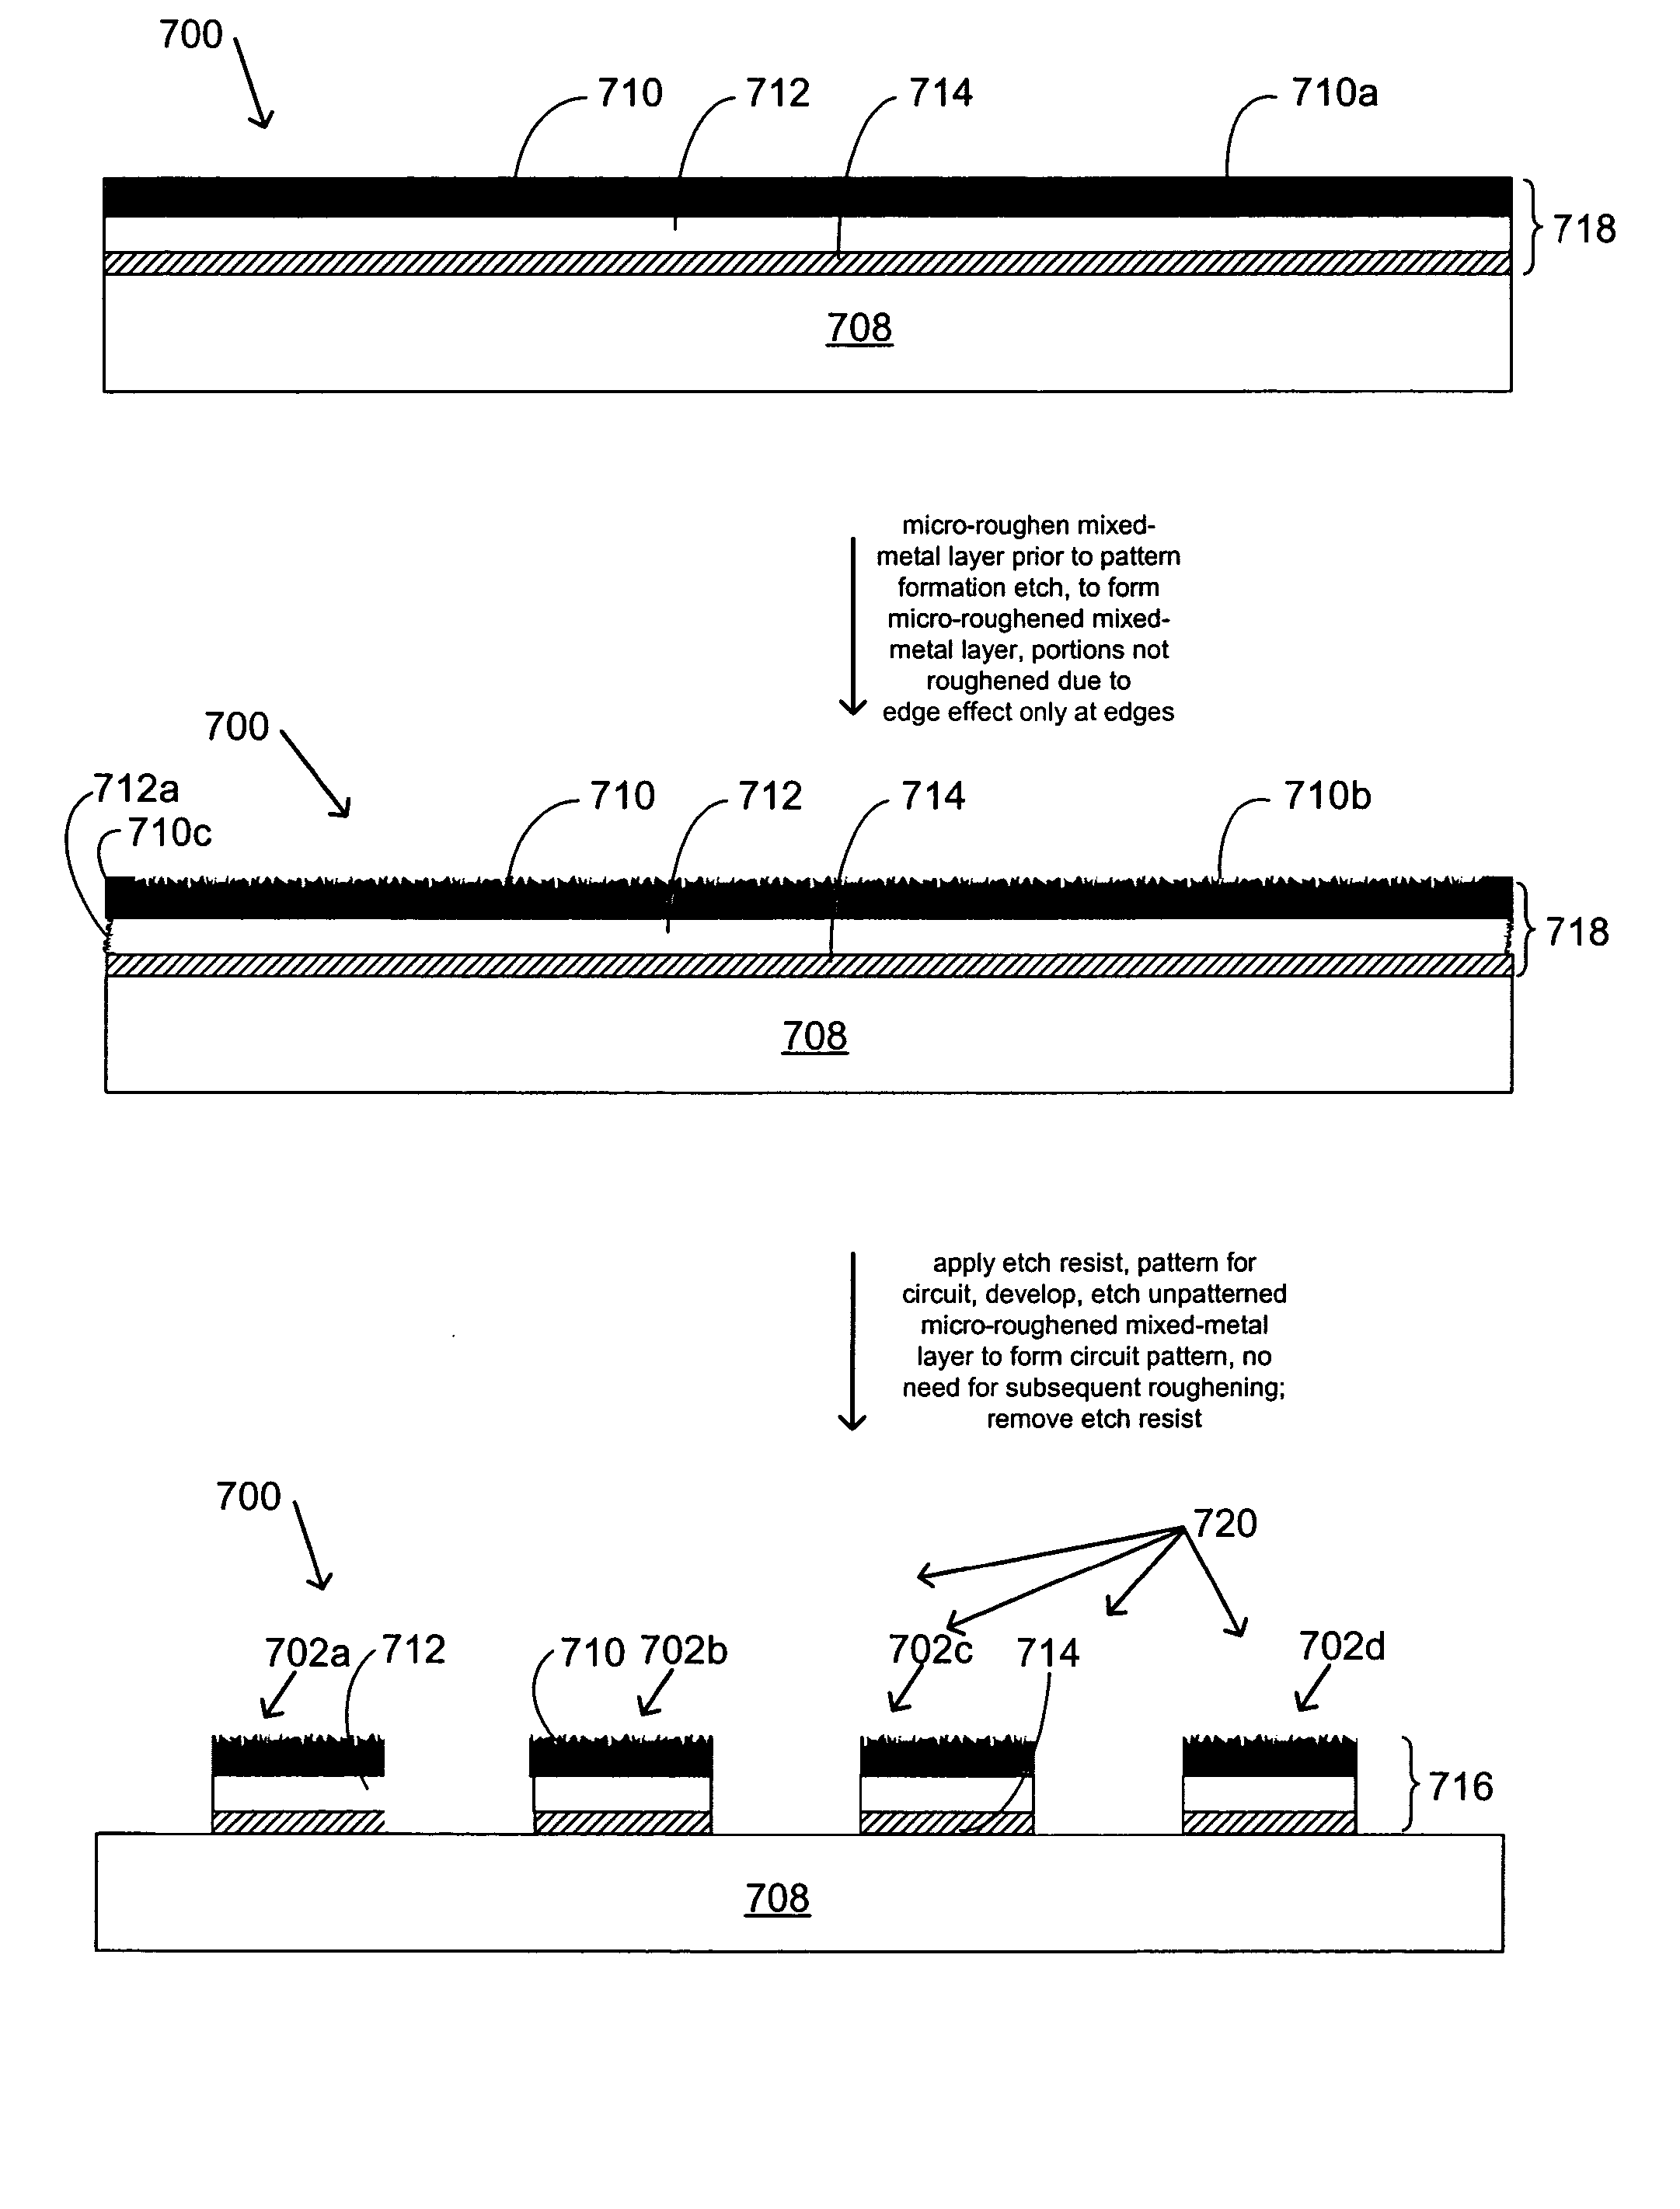 Method for micro-roughening treatment of copper and mixed-metal circuitry